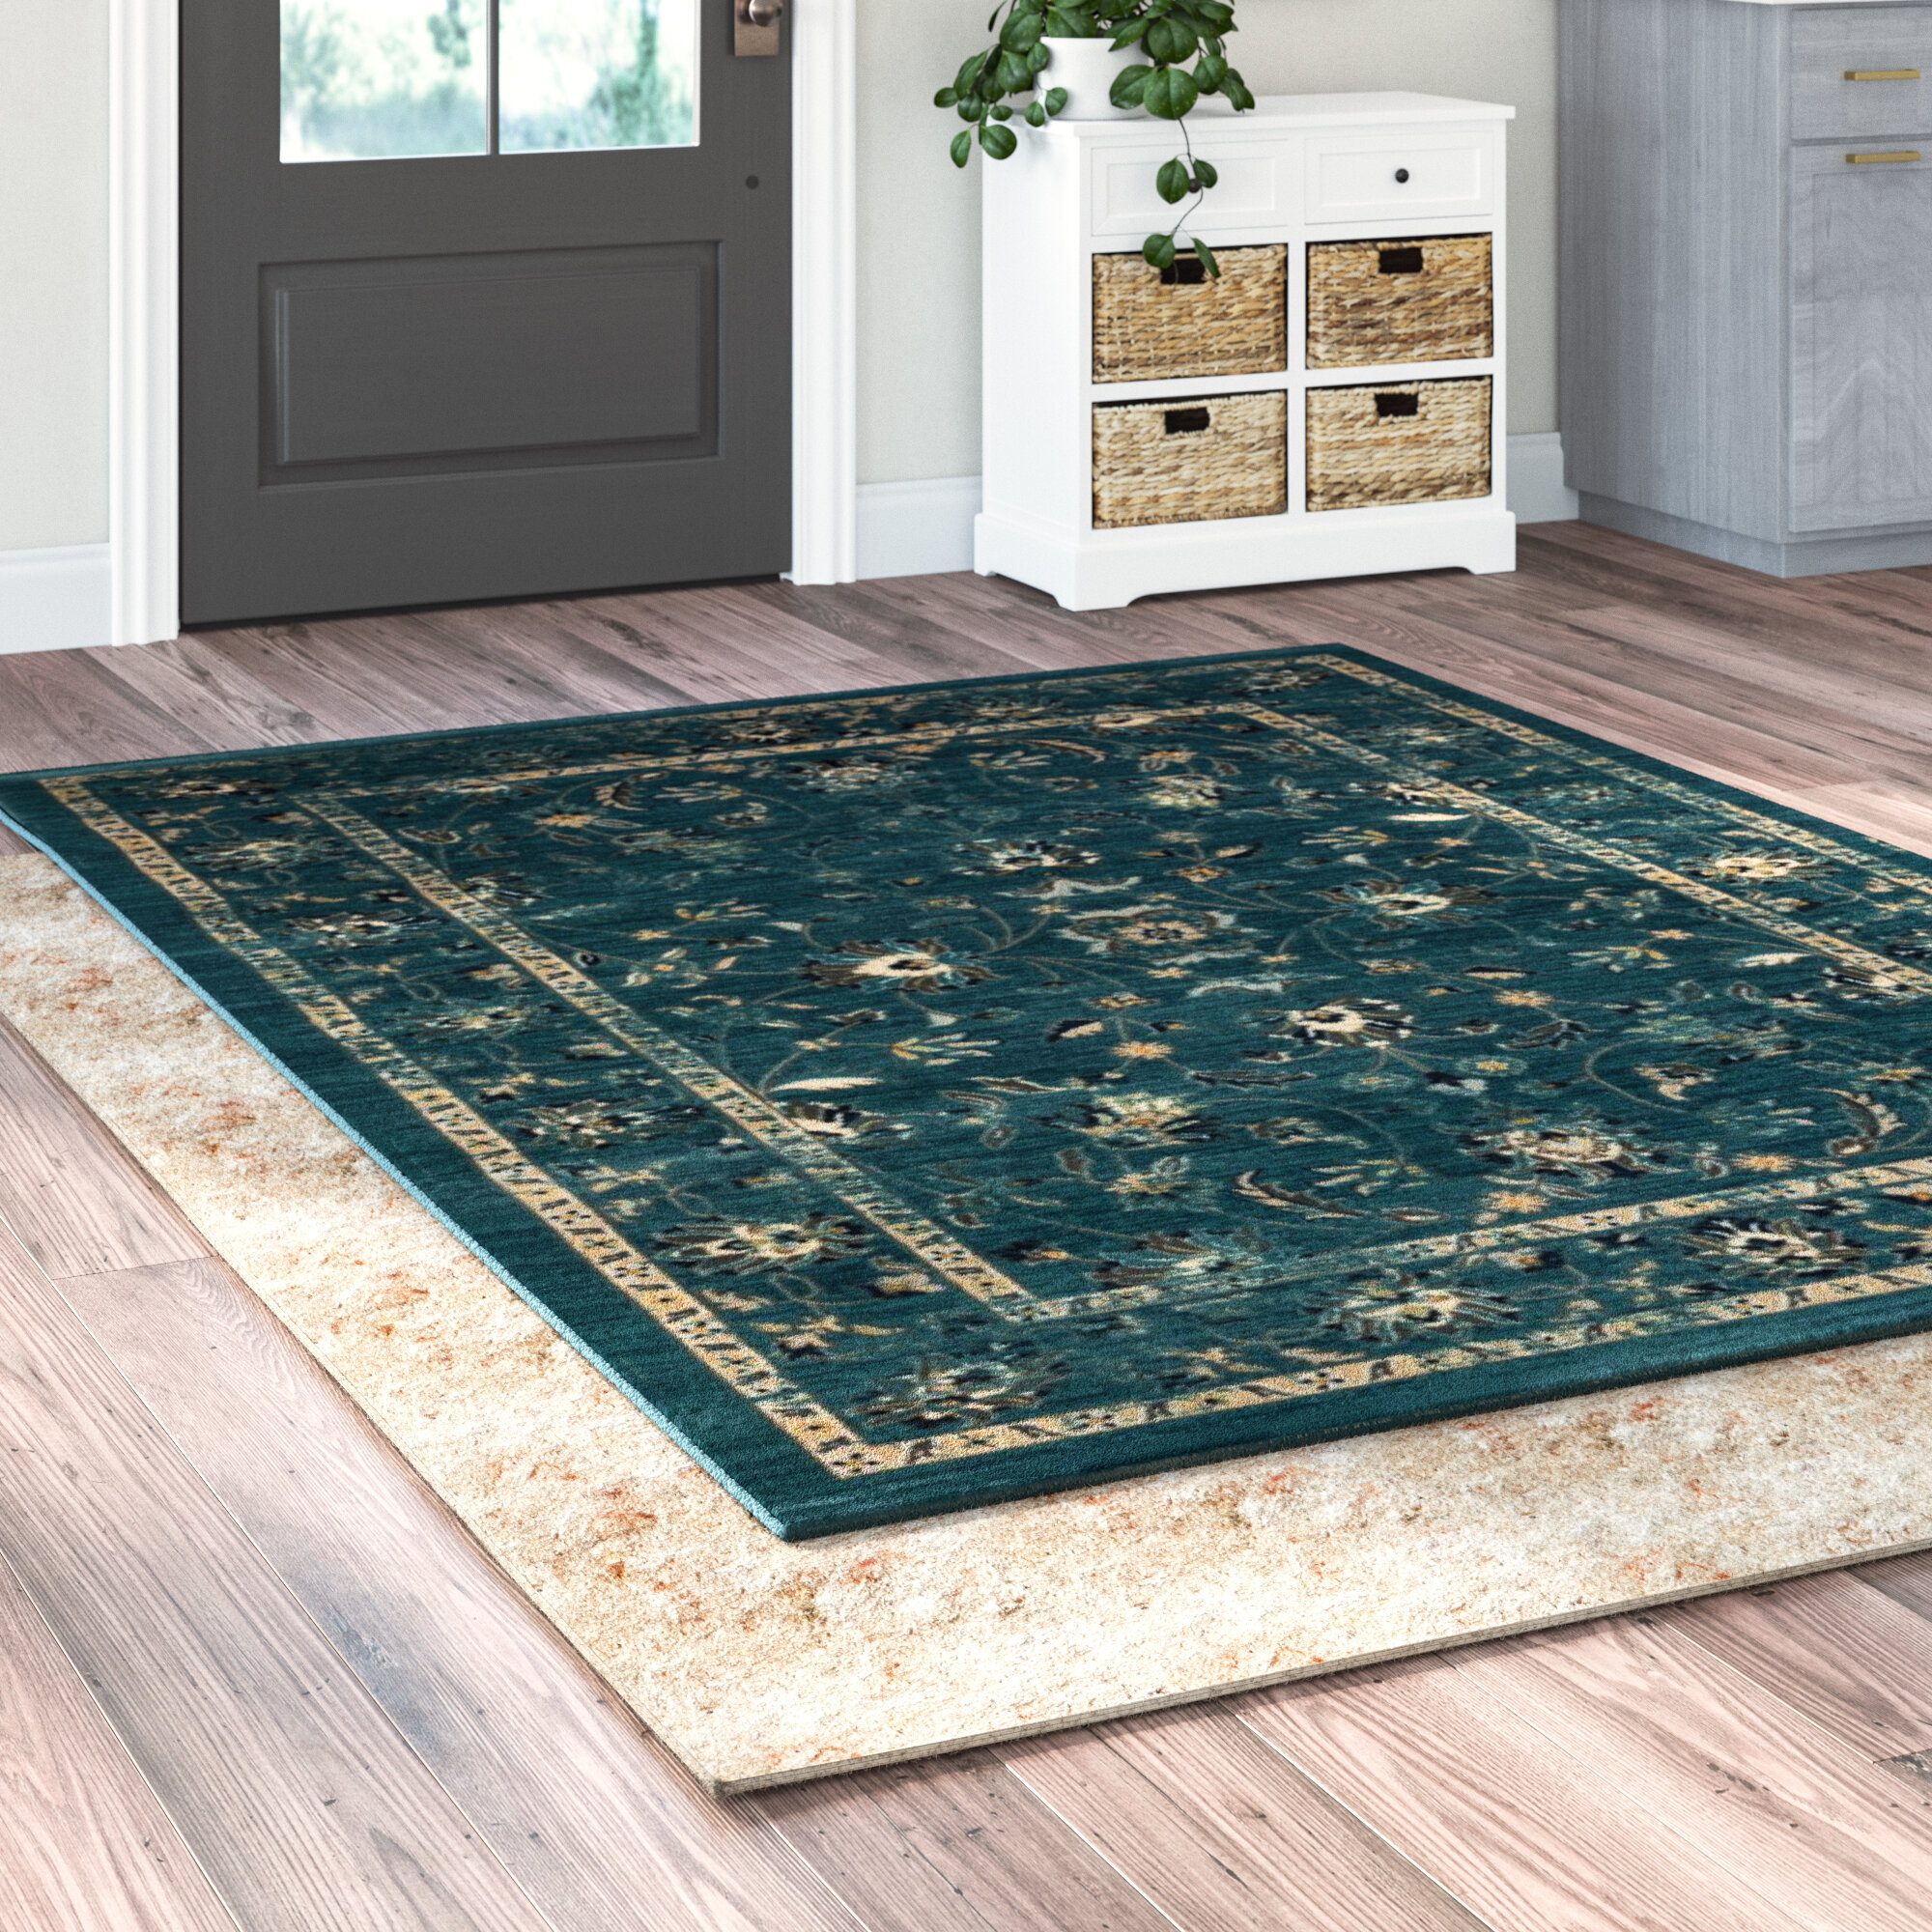 Area Rugs Runners Pads Home Decor Non Slip Runner Rug Pad 2 X 8